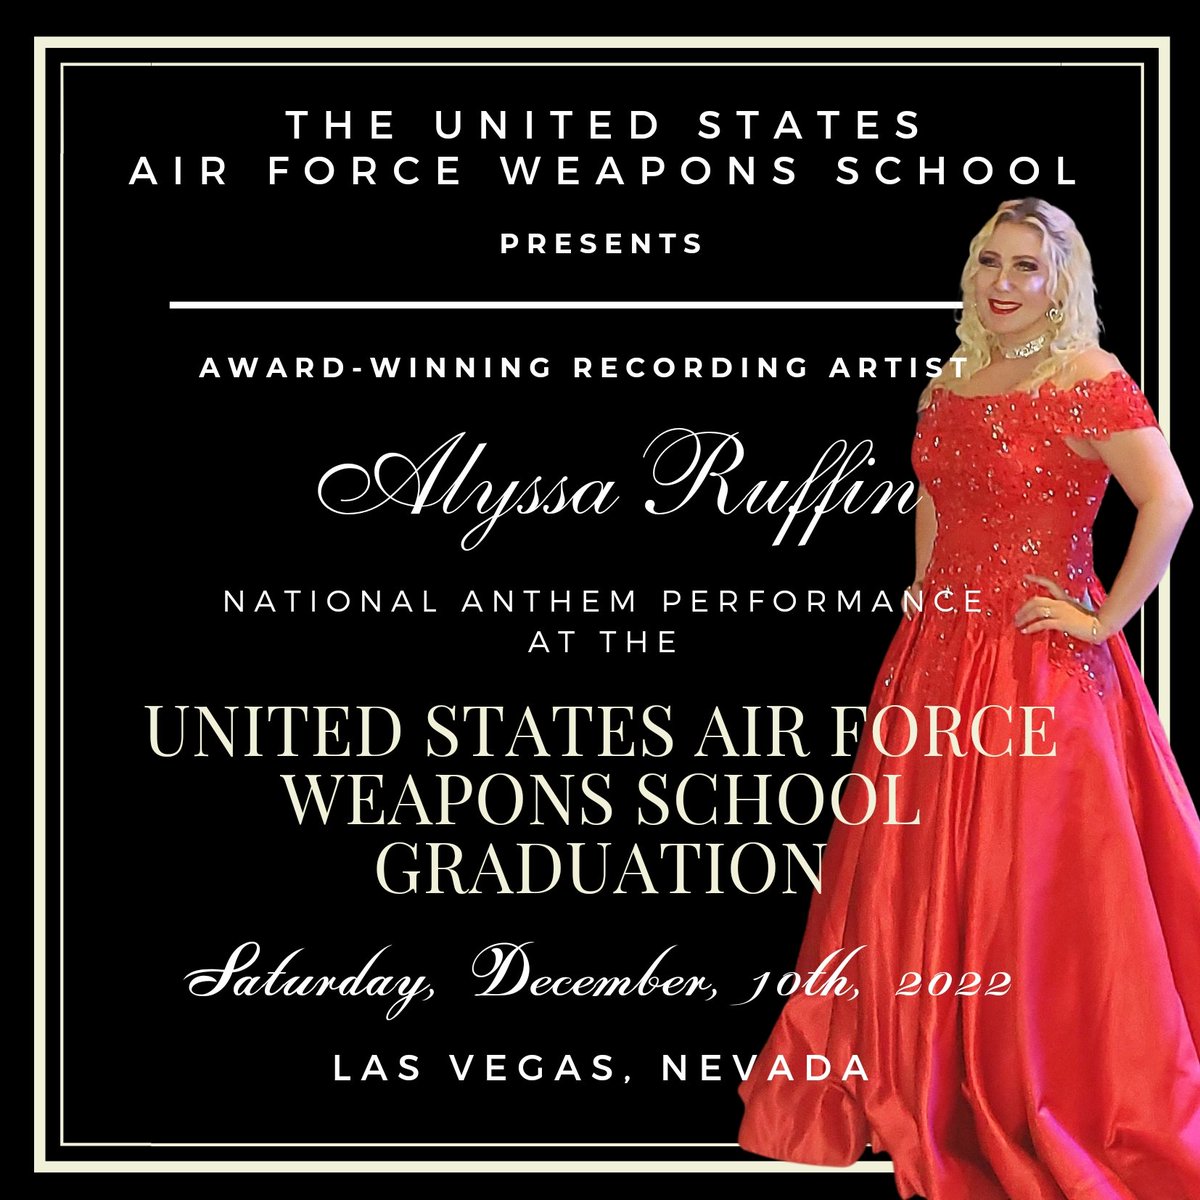 HAPPY FRIDAY! I'm pleased to announce I've been formally invited to perform at the United States Air Force Weapons School December Graduation, at Nellis Air Force Base in Las Vegas, Nevada! What an incredible honor! #alyssaruffin #womeninmusic #USAFWS #spaceforcewife #sempersupra